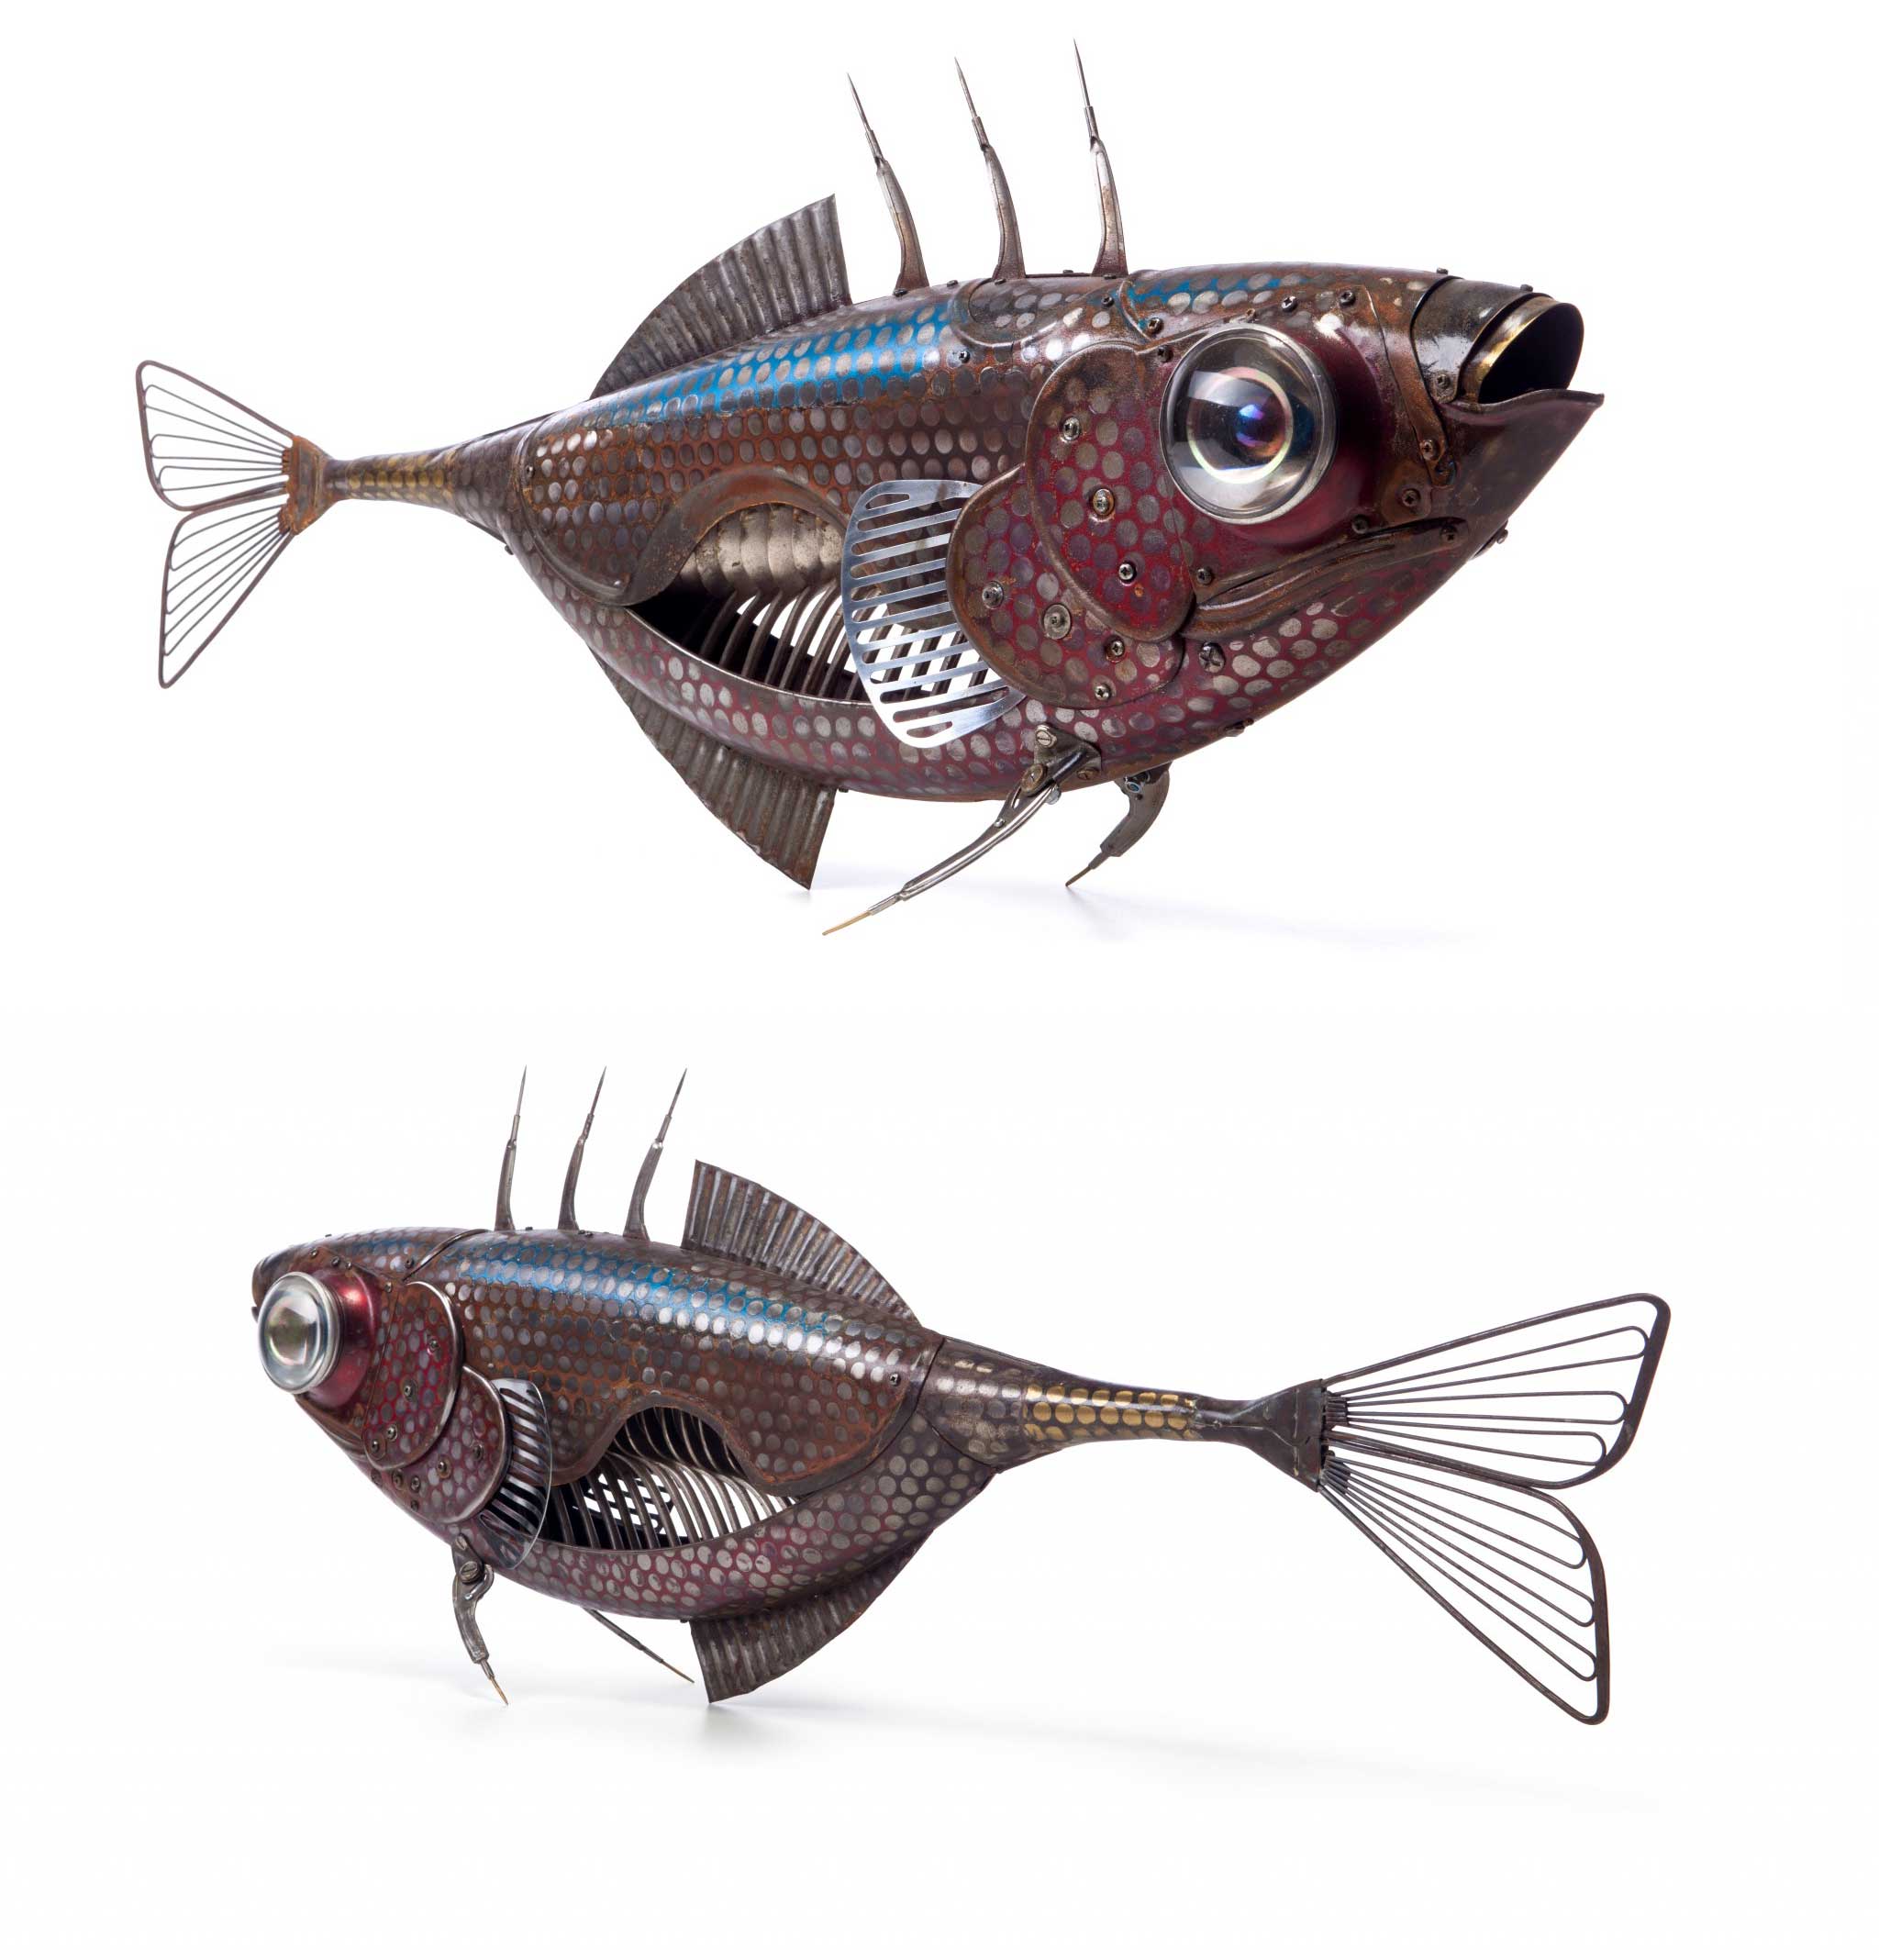 "Stickleback" 2013, Edouard Martinent. Body: moped fenders and chain guards. Bones: tablespoons. Gills: car door parts. Fins: cake tins, fish slices, compasses. Tail: motorbike silencer, fish slices. Eyes: flashlights. Head: Solex front fenders.